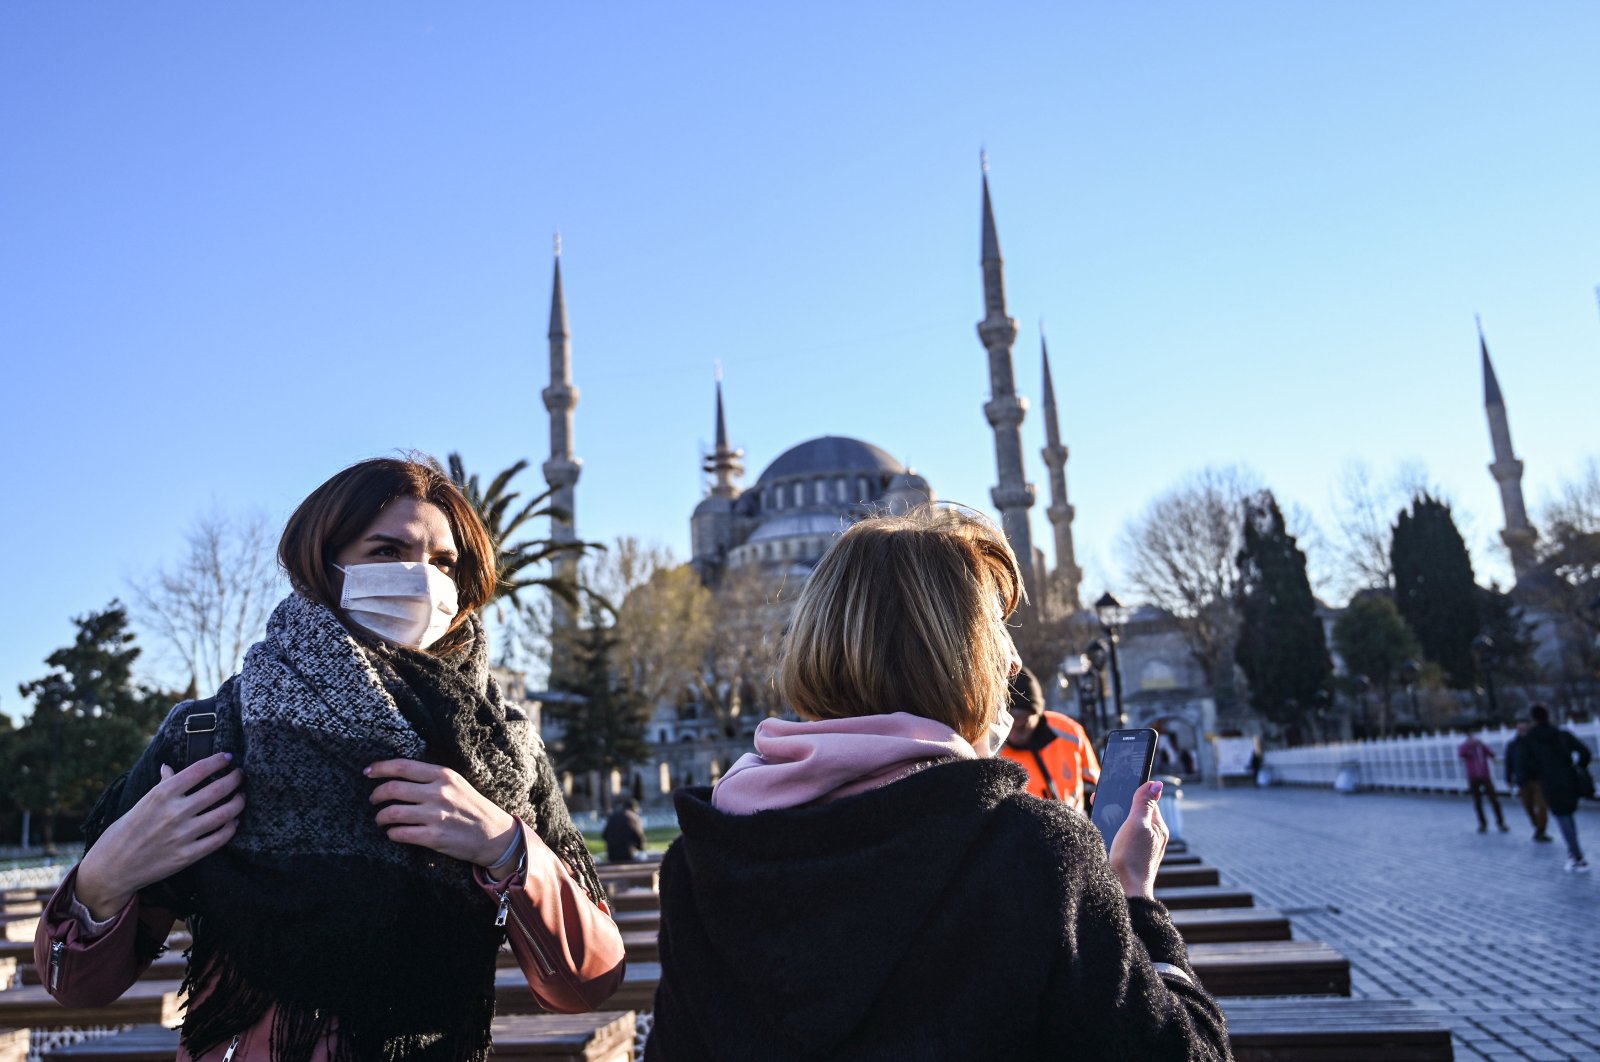 Women wear protective face masks near Sultanahmet Mosque, also known as the Blue Mosque, as the nation tries to contain the coronavirus outbreak, Istanbul, March 17, 2020 (AFP Photo)